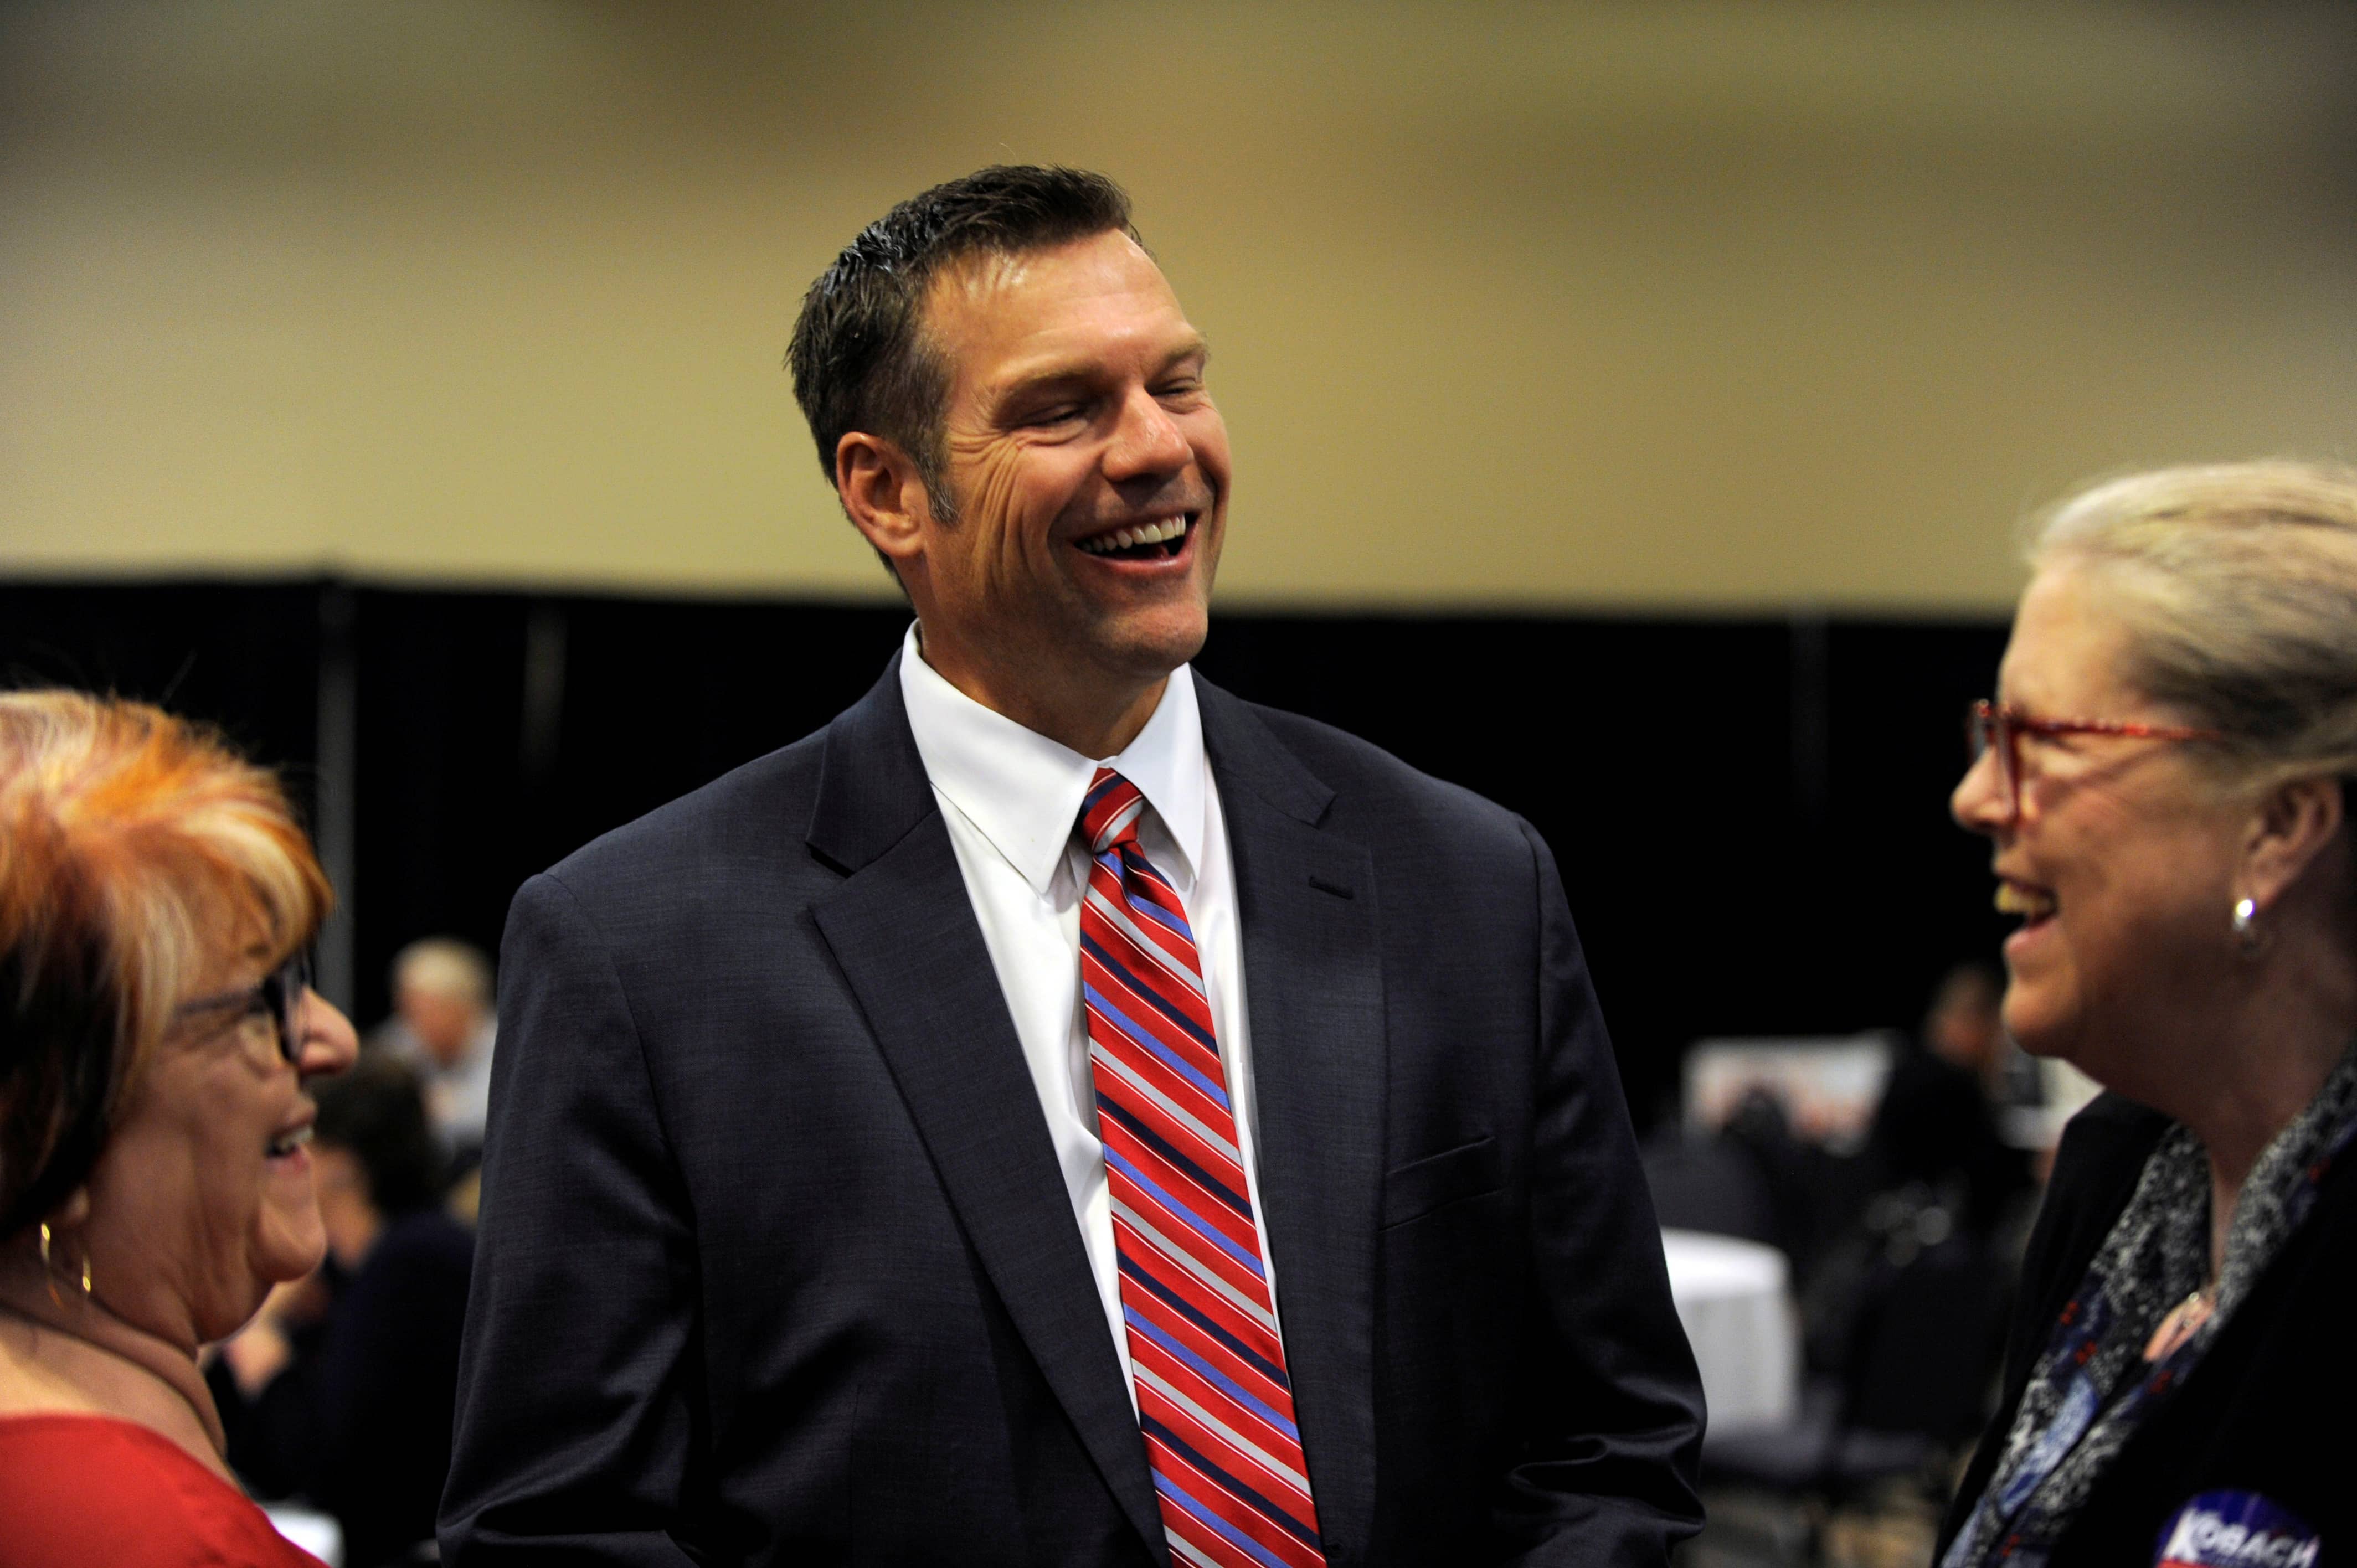 republican-gubernatorial-candidate-kris-kobach-greets-supporters-at-his-election-night-party-in-topeka